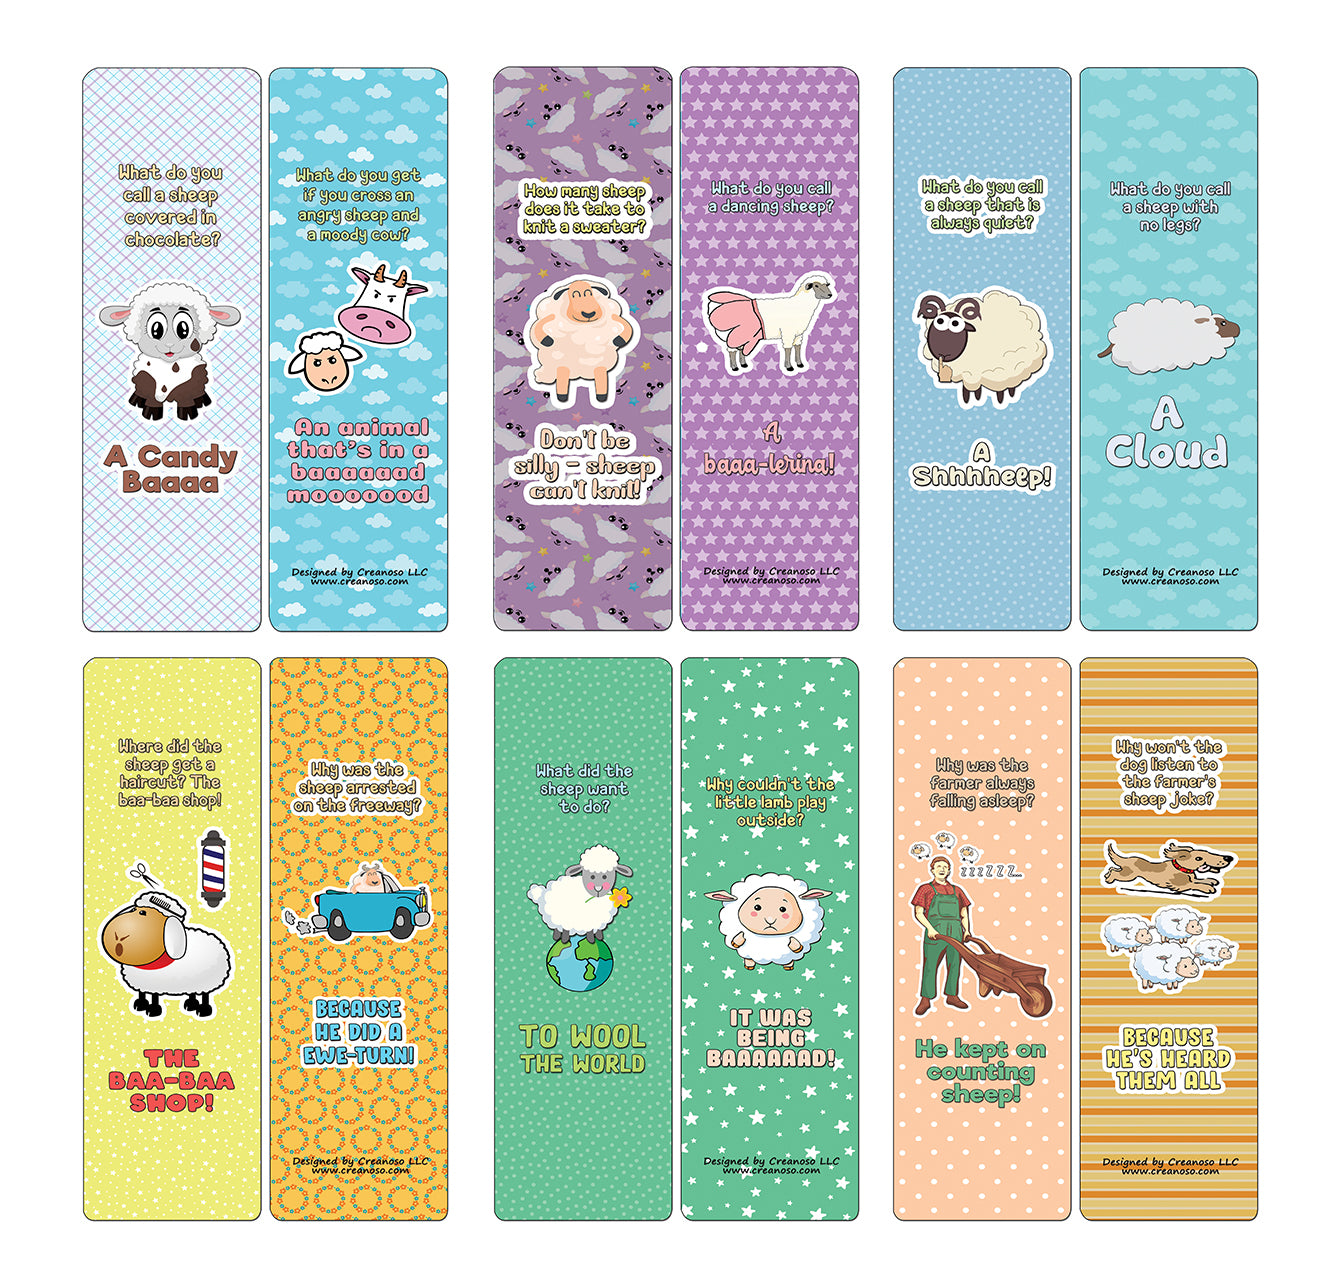 Creanoso Funny Sheep Jokes Bookmarks Cards (30-Pack) - Classroom Reward Incentives for Students and Children - Stocking Stuffers Party Favors & Giveaways for Teens & Adults